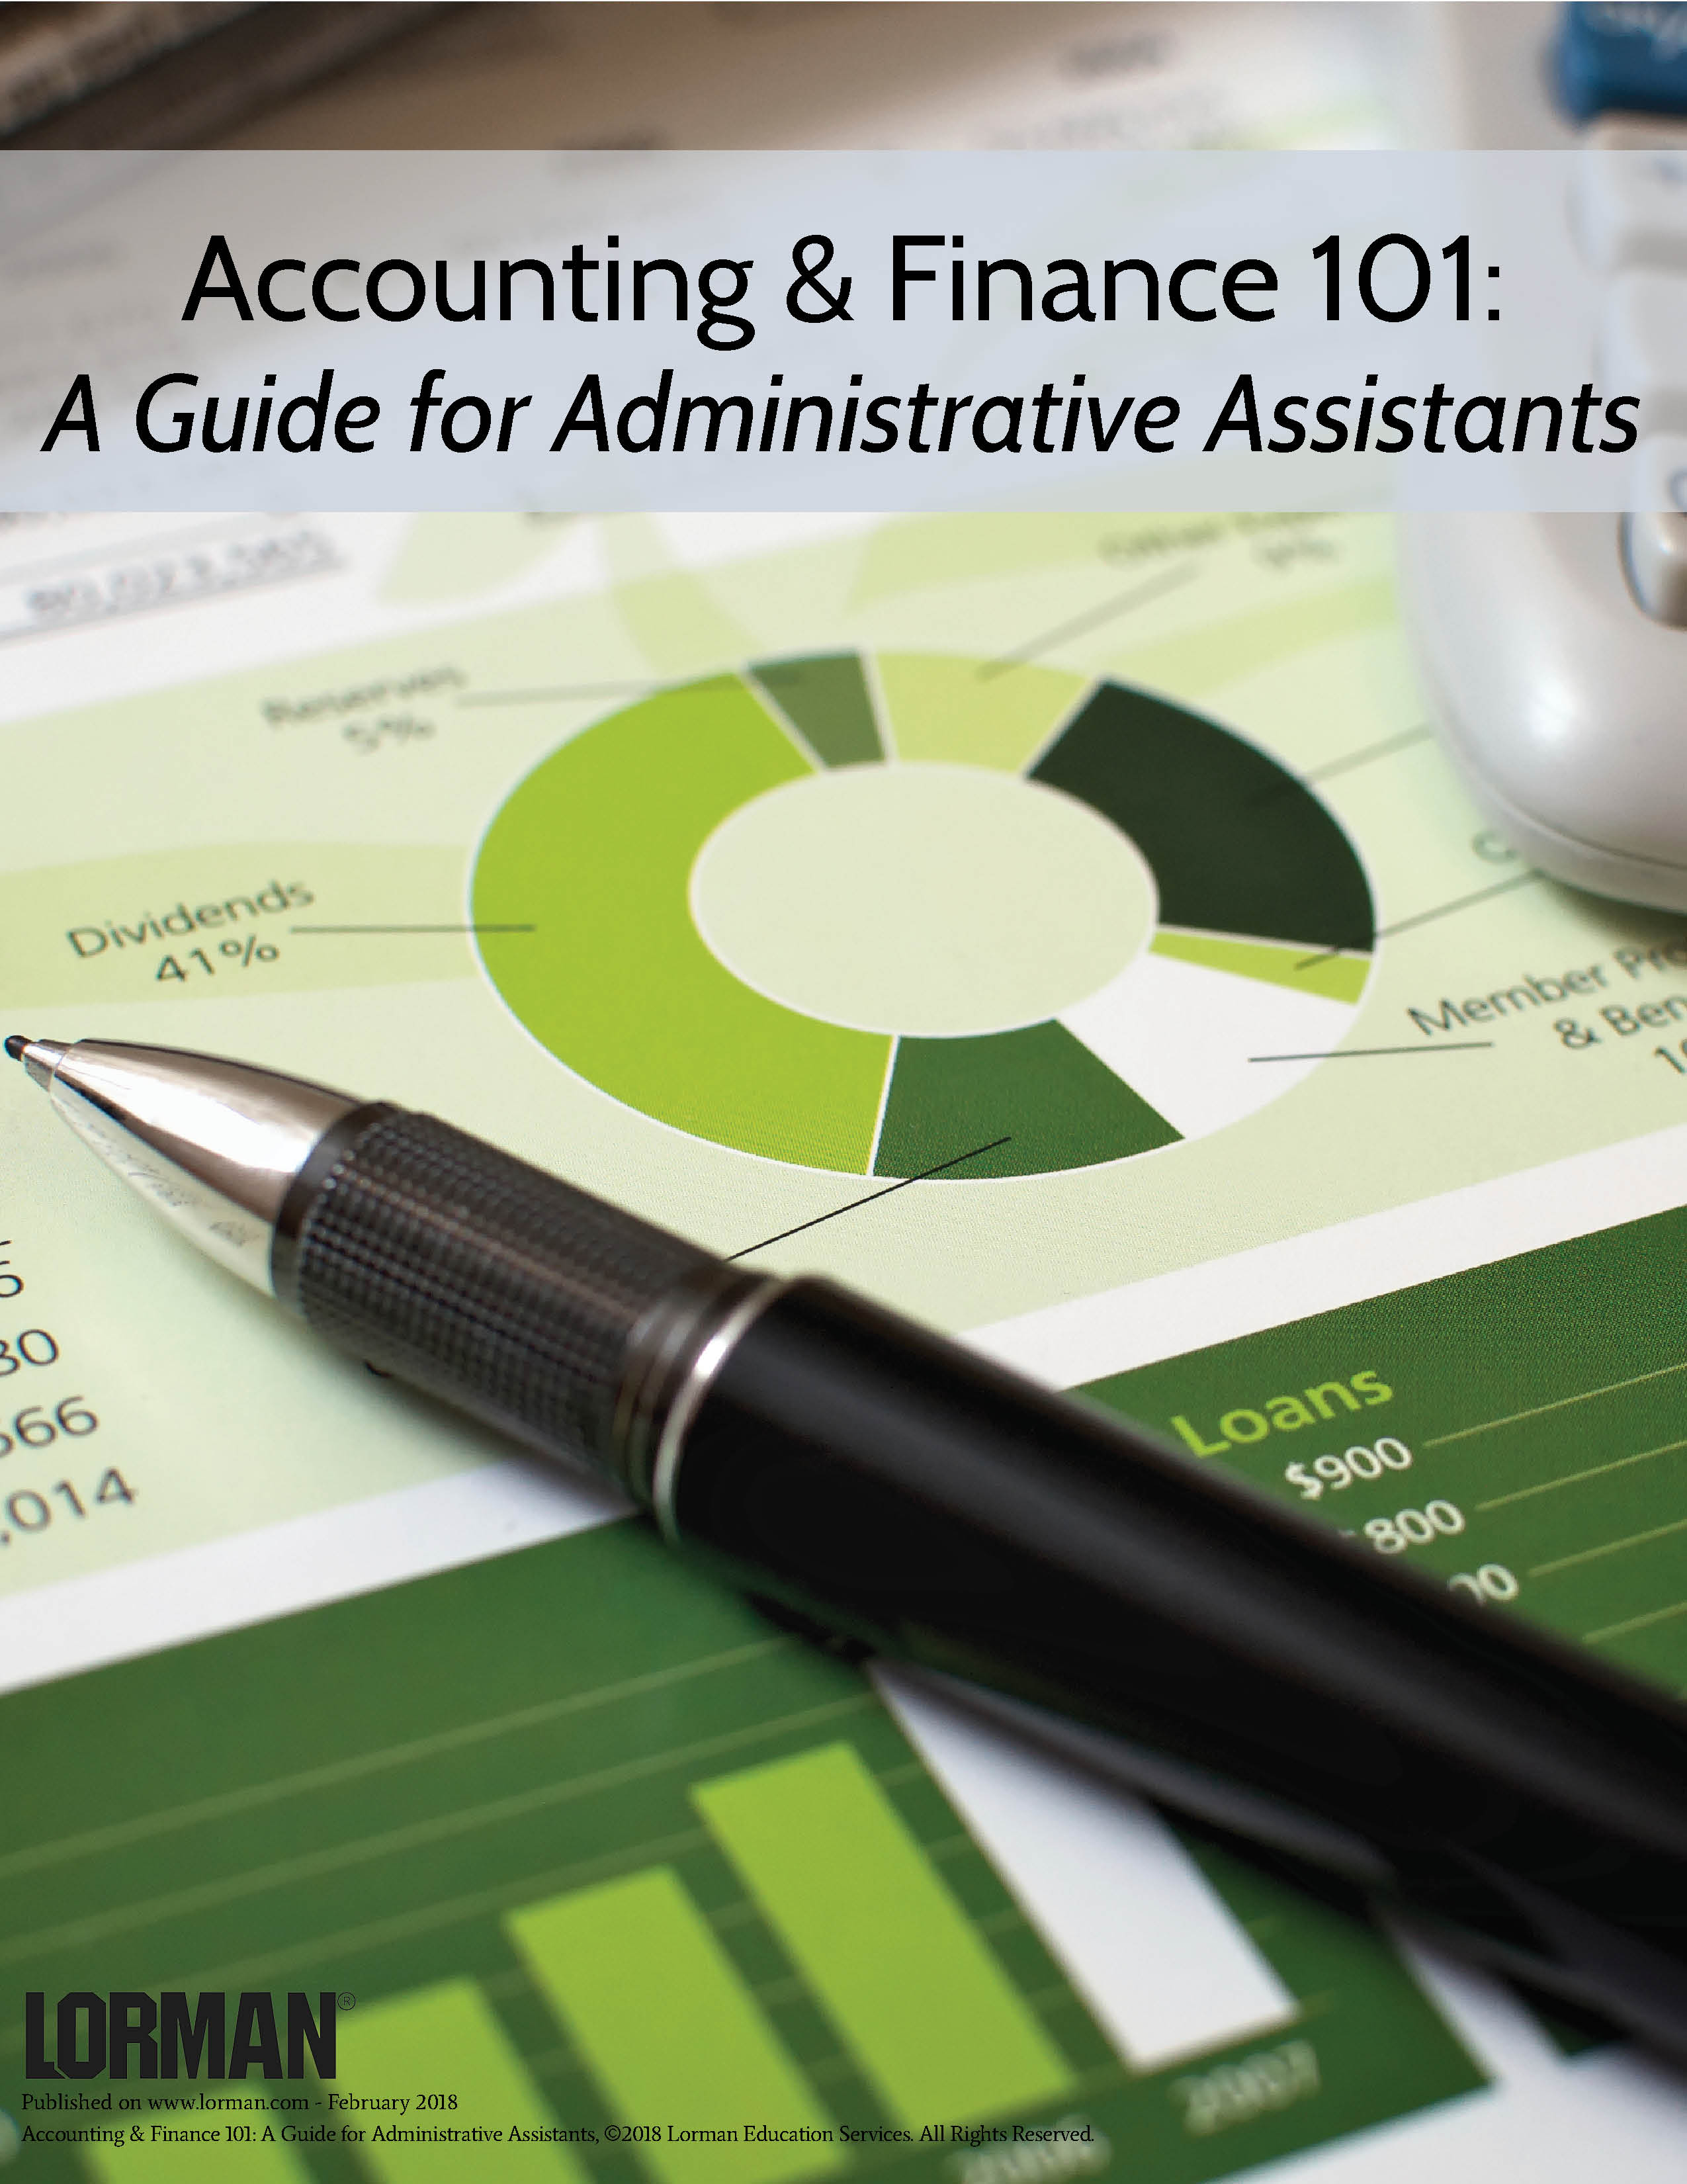 Accounting & Finance 101: A Guide for Administrative Assistants